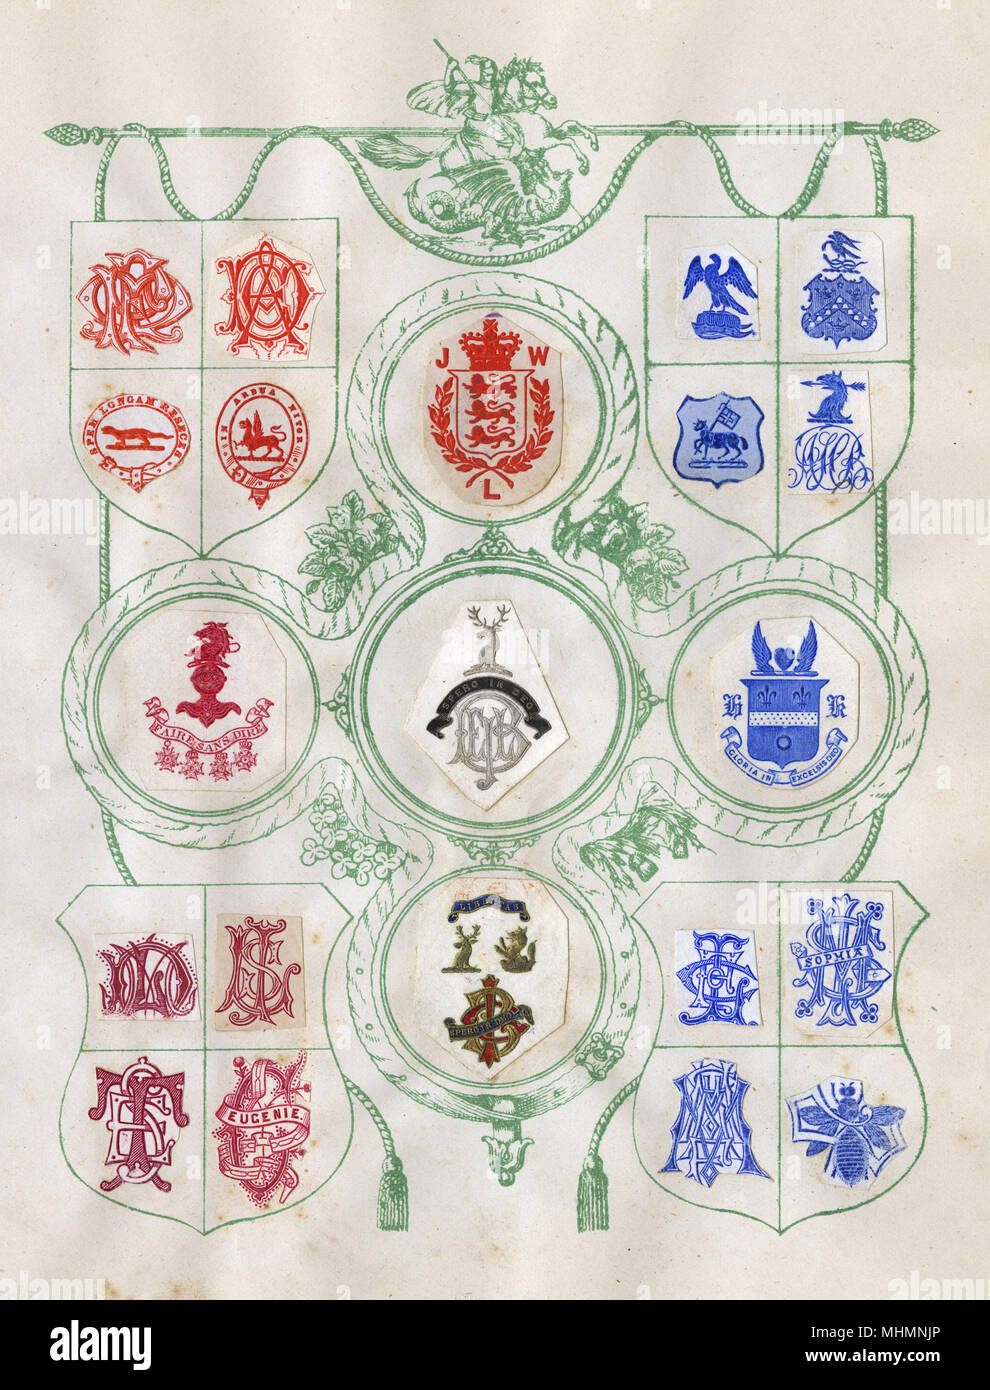 Loose page from a former scrapbook of crests and heraldry featuring family crests, coats of arms and many devices, shields, monograms and mottos!     Date: late 19th century Stock Photo